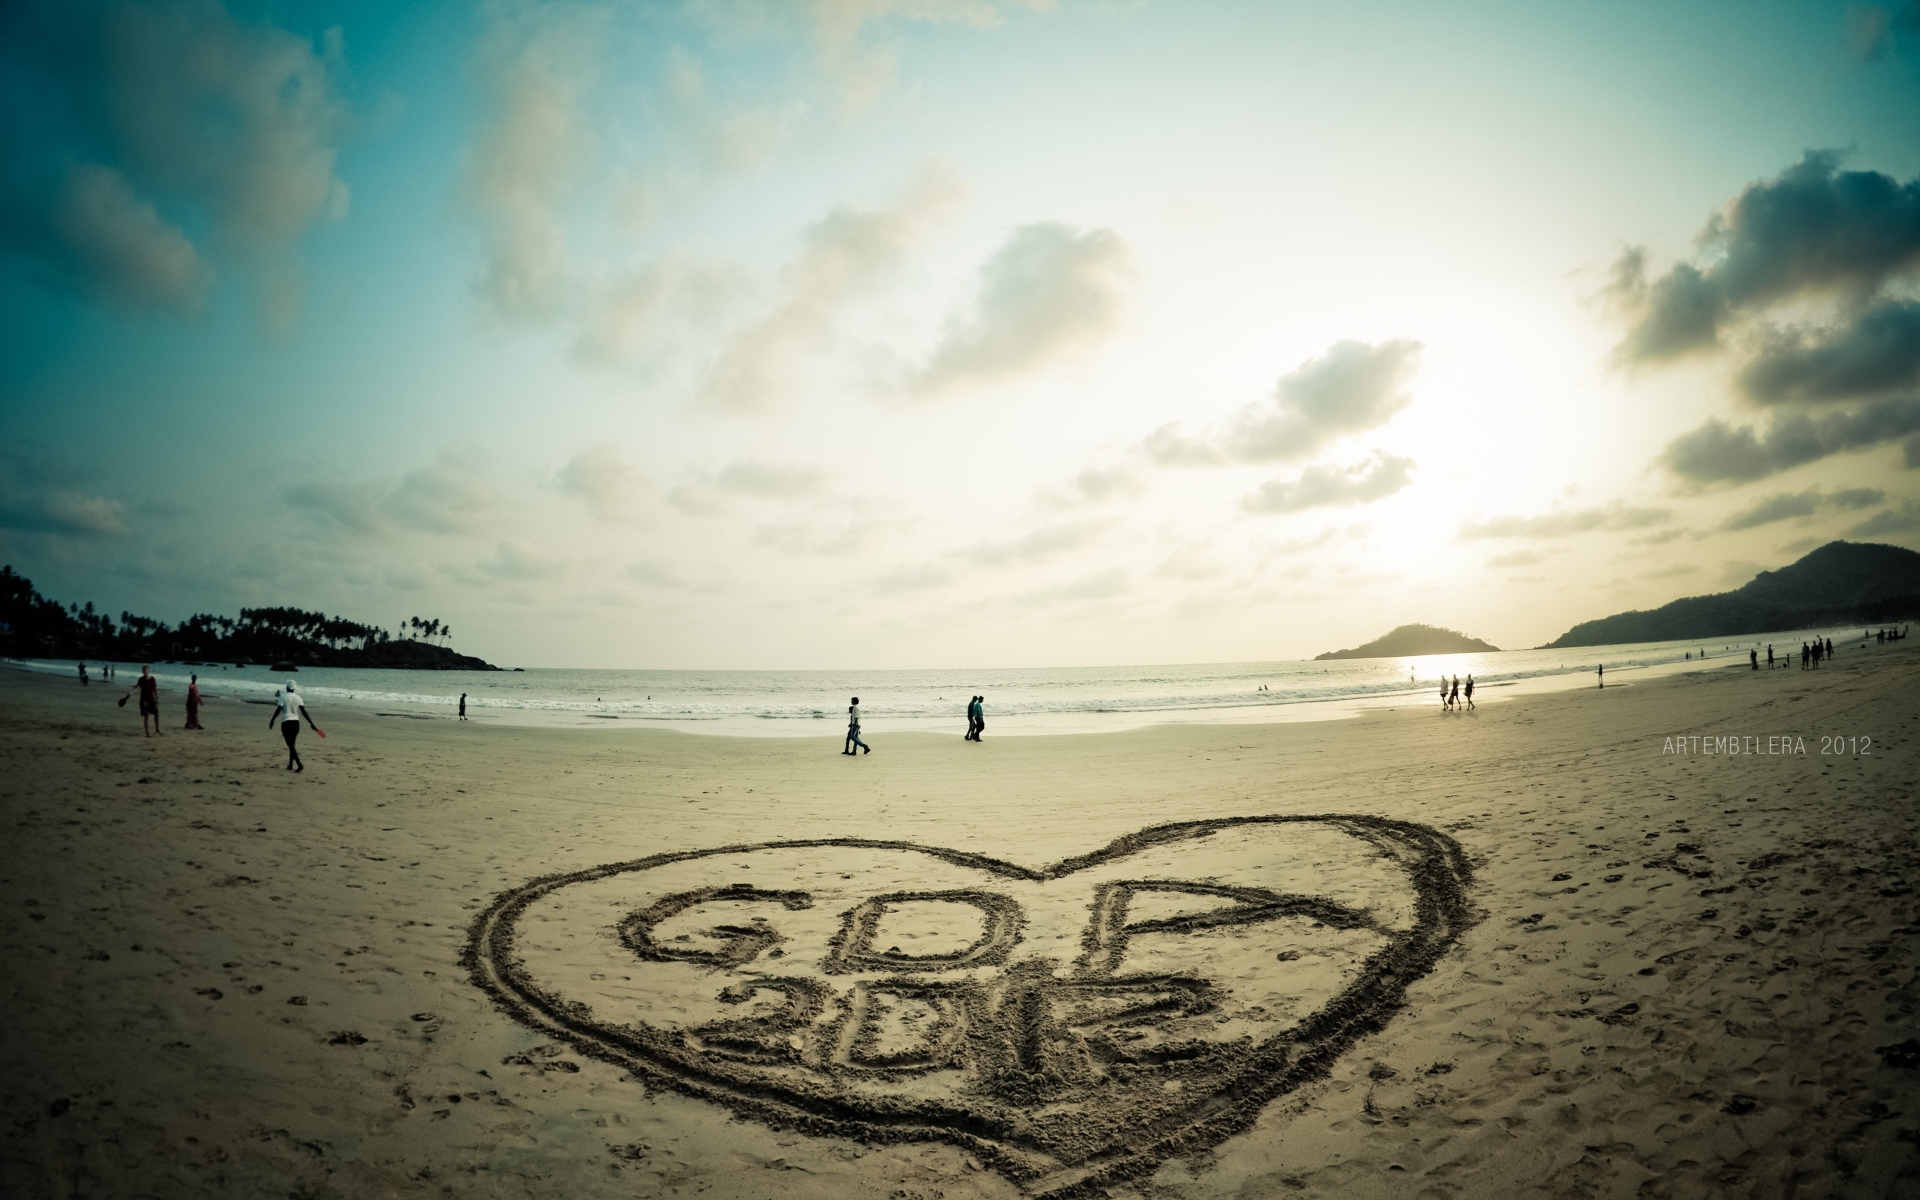 Drawing on the sand in Goa